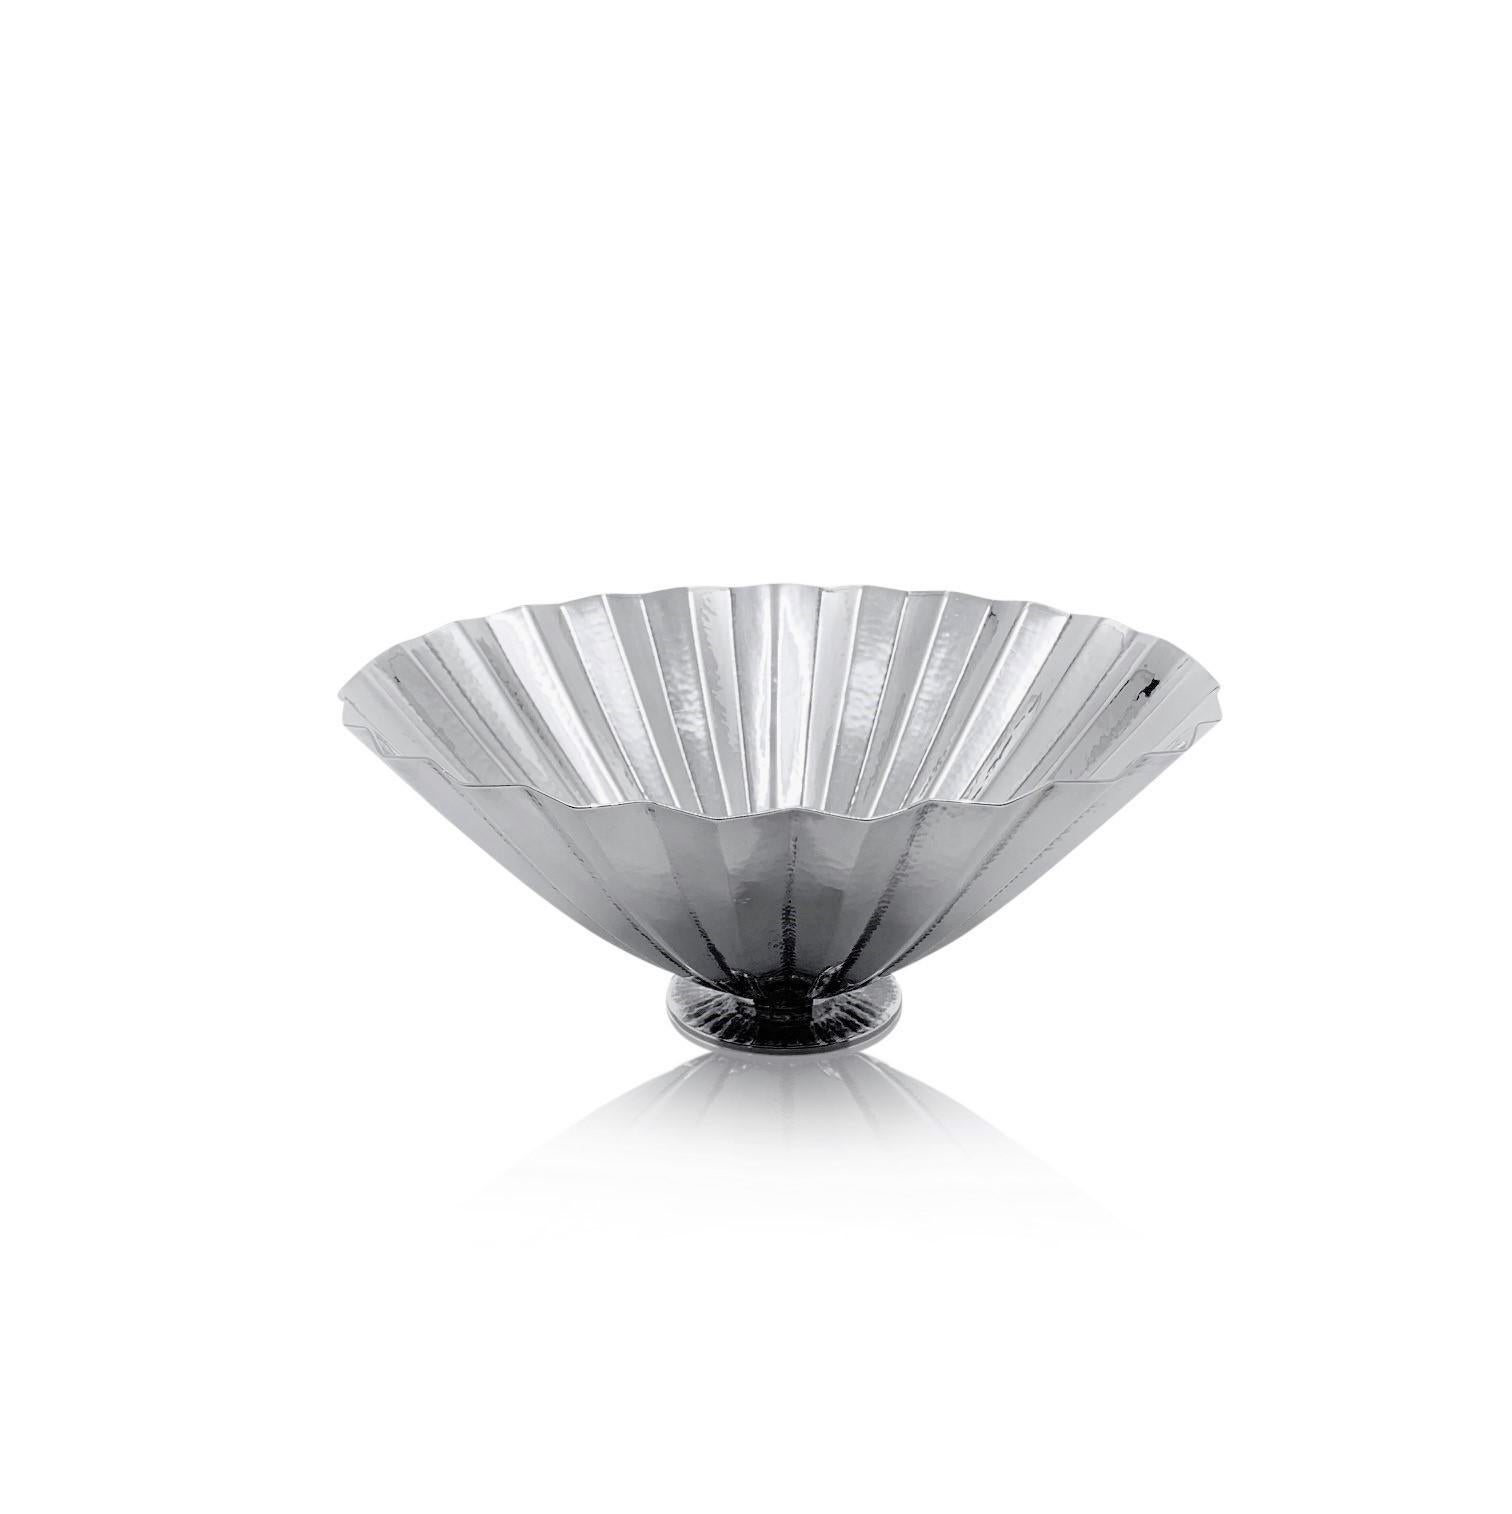 A very rare Georg Jensen sterling silver bowl, design #731 by Johan Rohde (1856-1935) from 1930. This bowl shows Rohde’s transition into Art Deco, a design period both he and Georg Jensen experienced toward the end of their lives. The beveled bowl